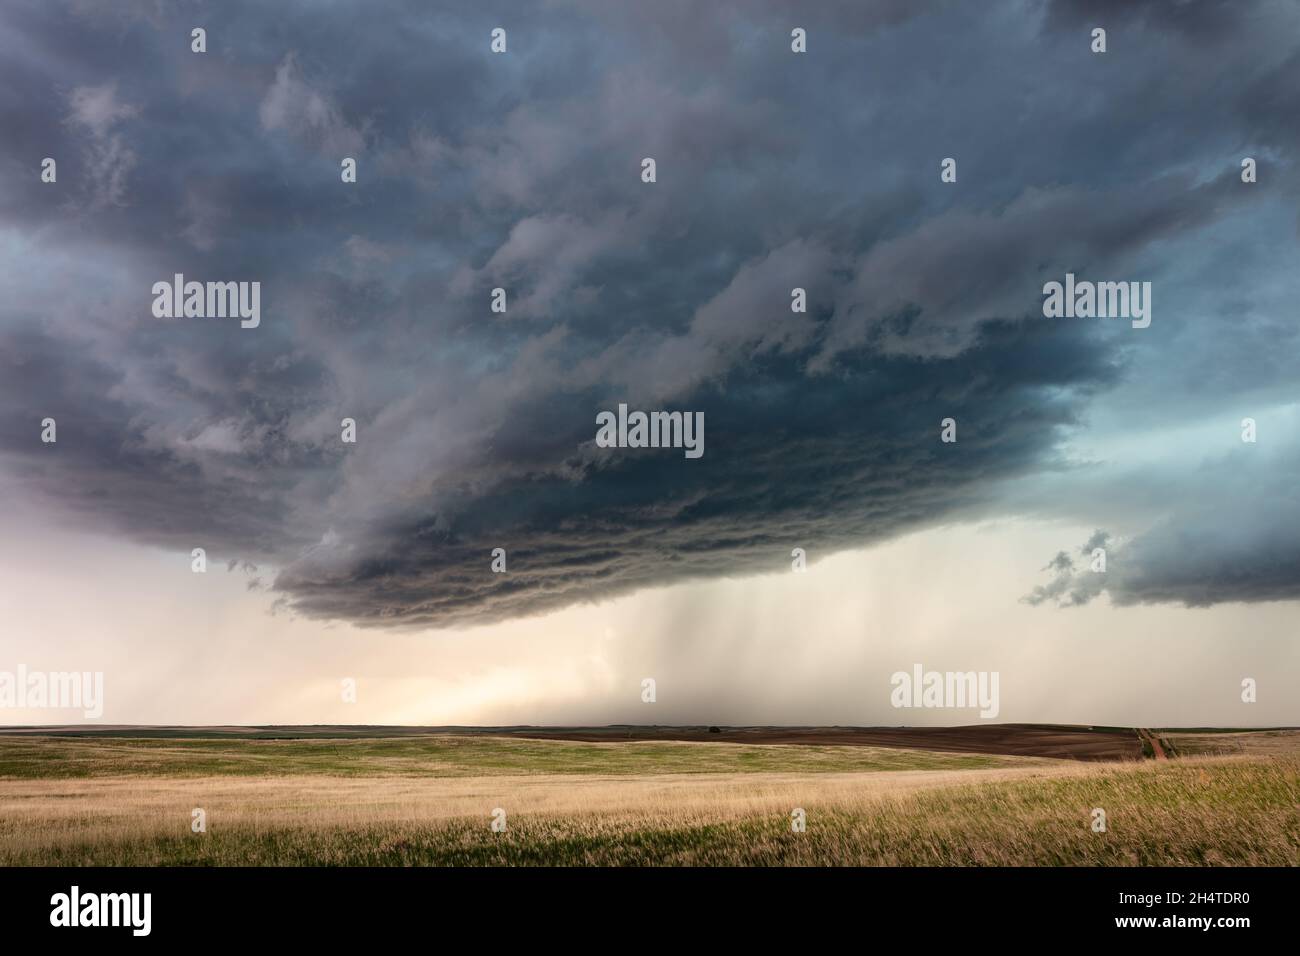 Stormy weather and sky with dark clouds and rain falling near Glendive, Montana, USA Stock Photo